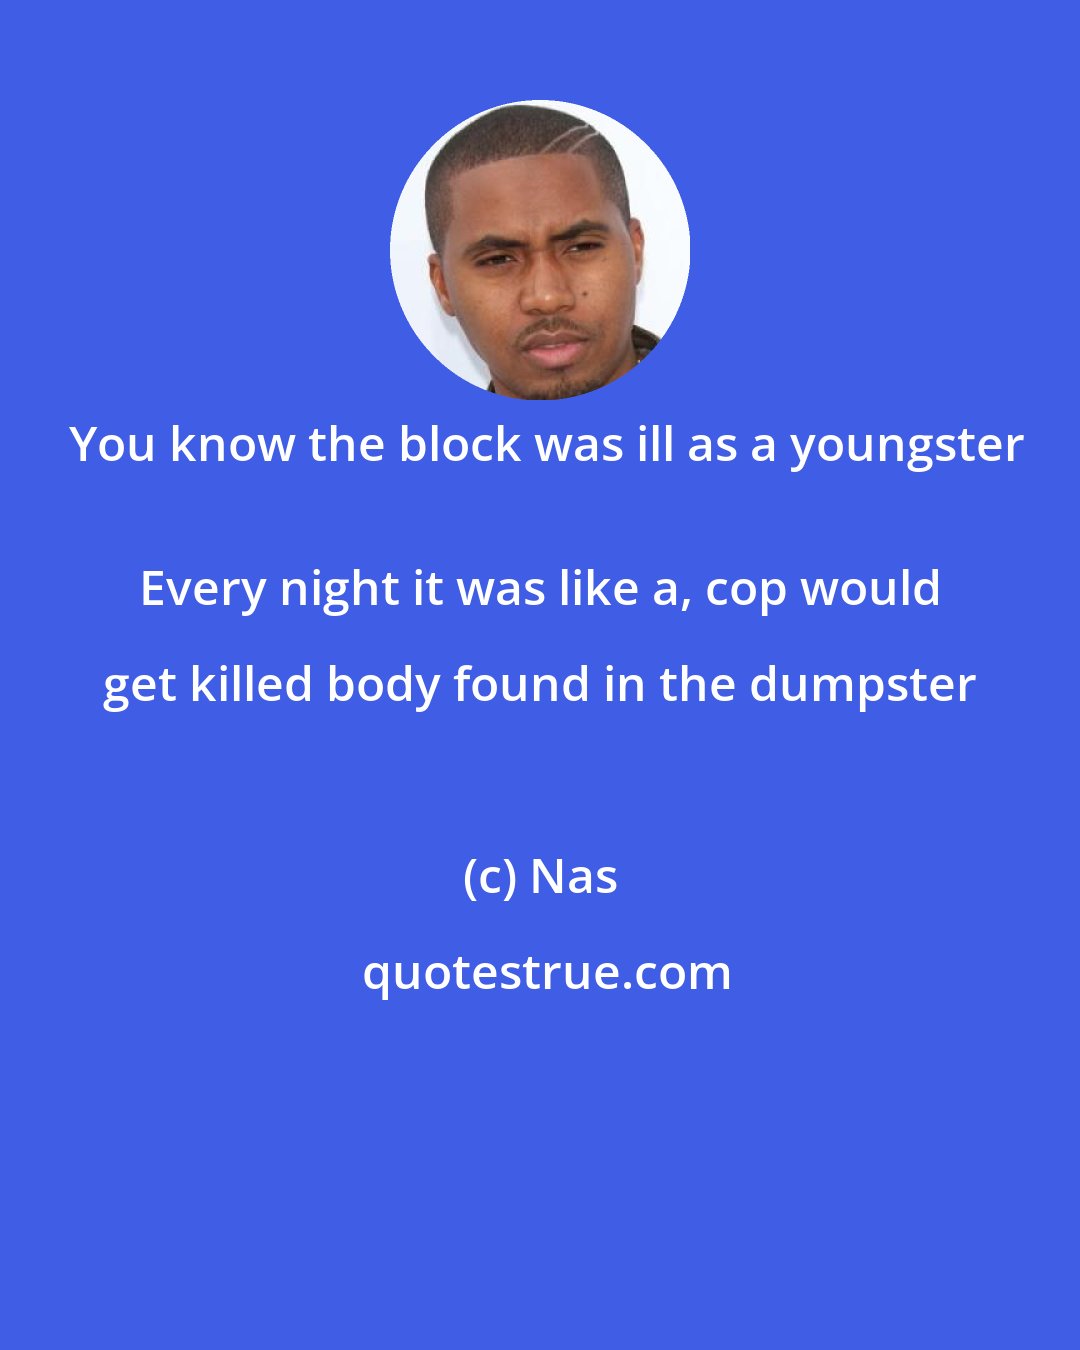 Nas: You know the block was ill as a youngster
 Every night it was like a, cop would get killed body found in the dumpster